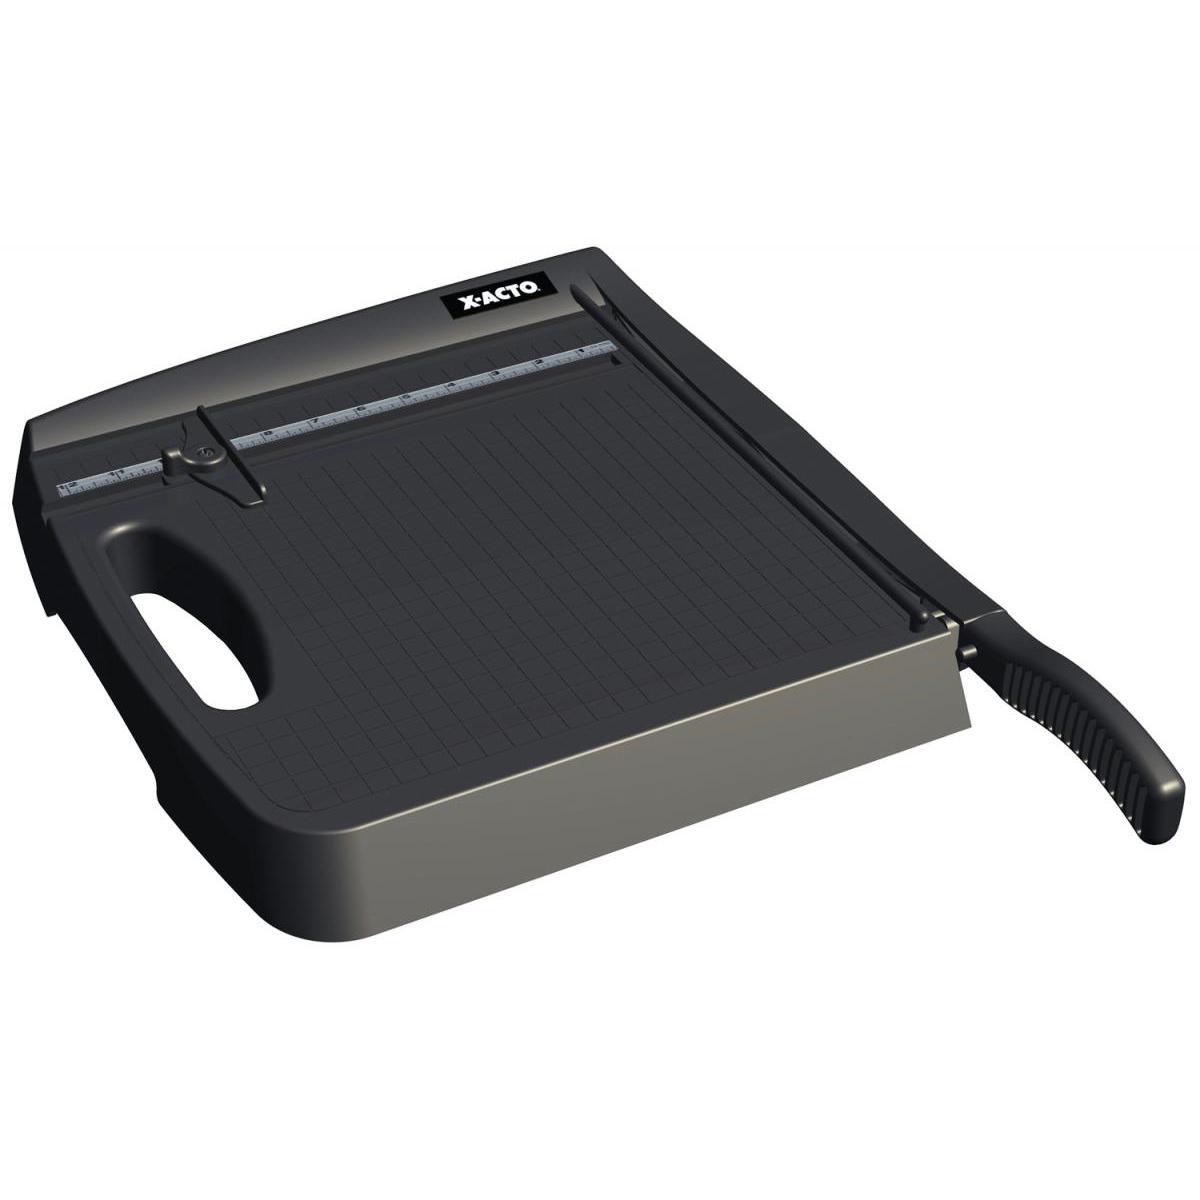  X-Acto Heavy Duty Guillotine Paper Trimmer 